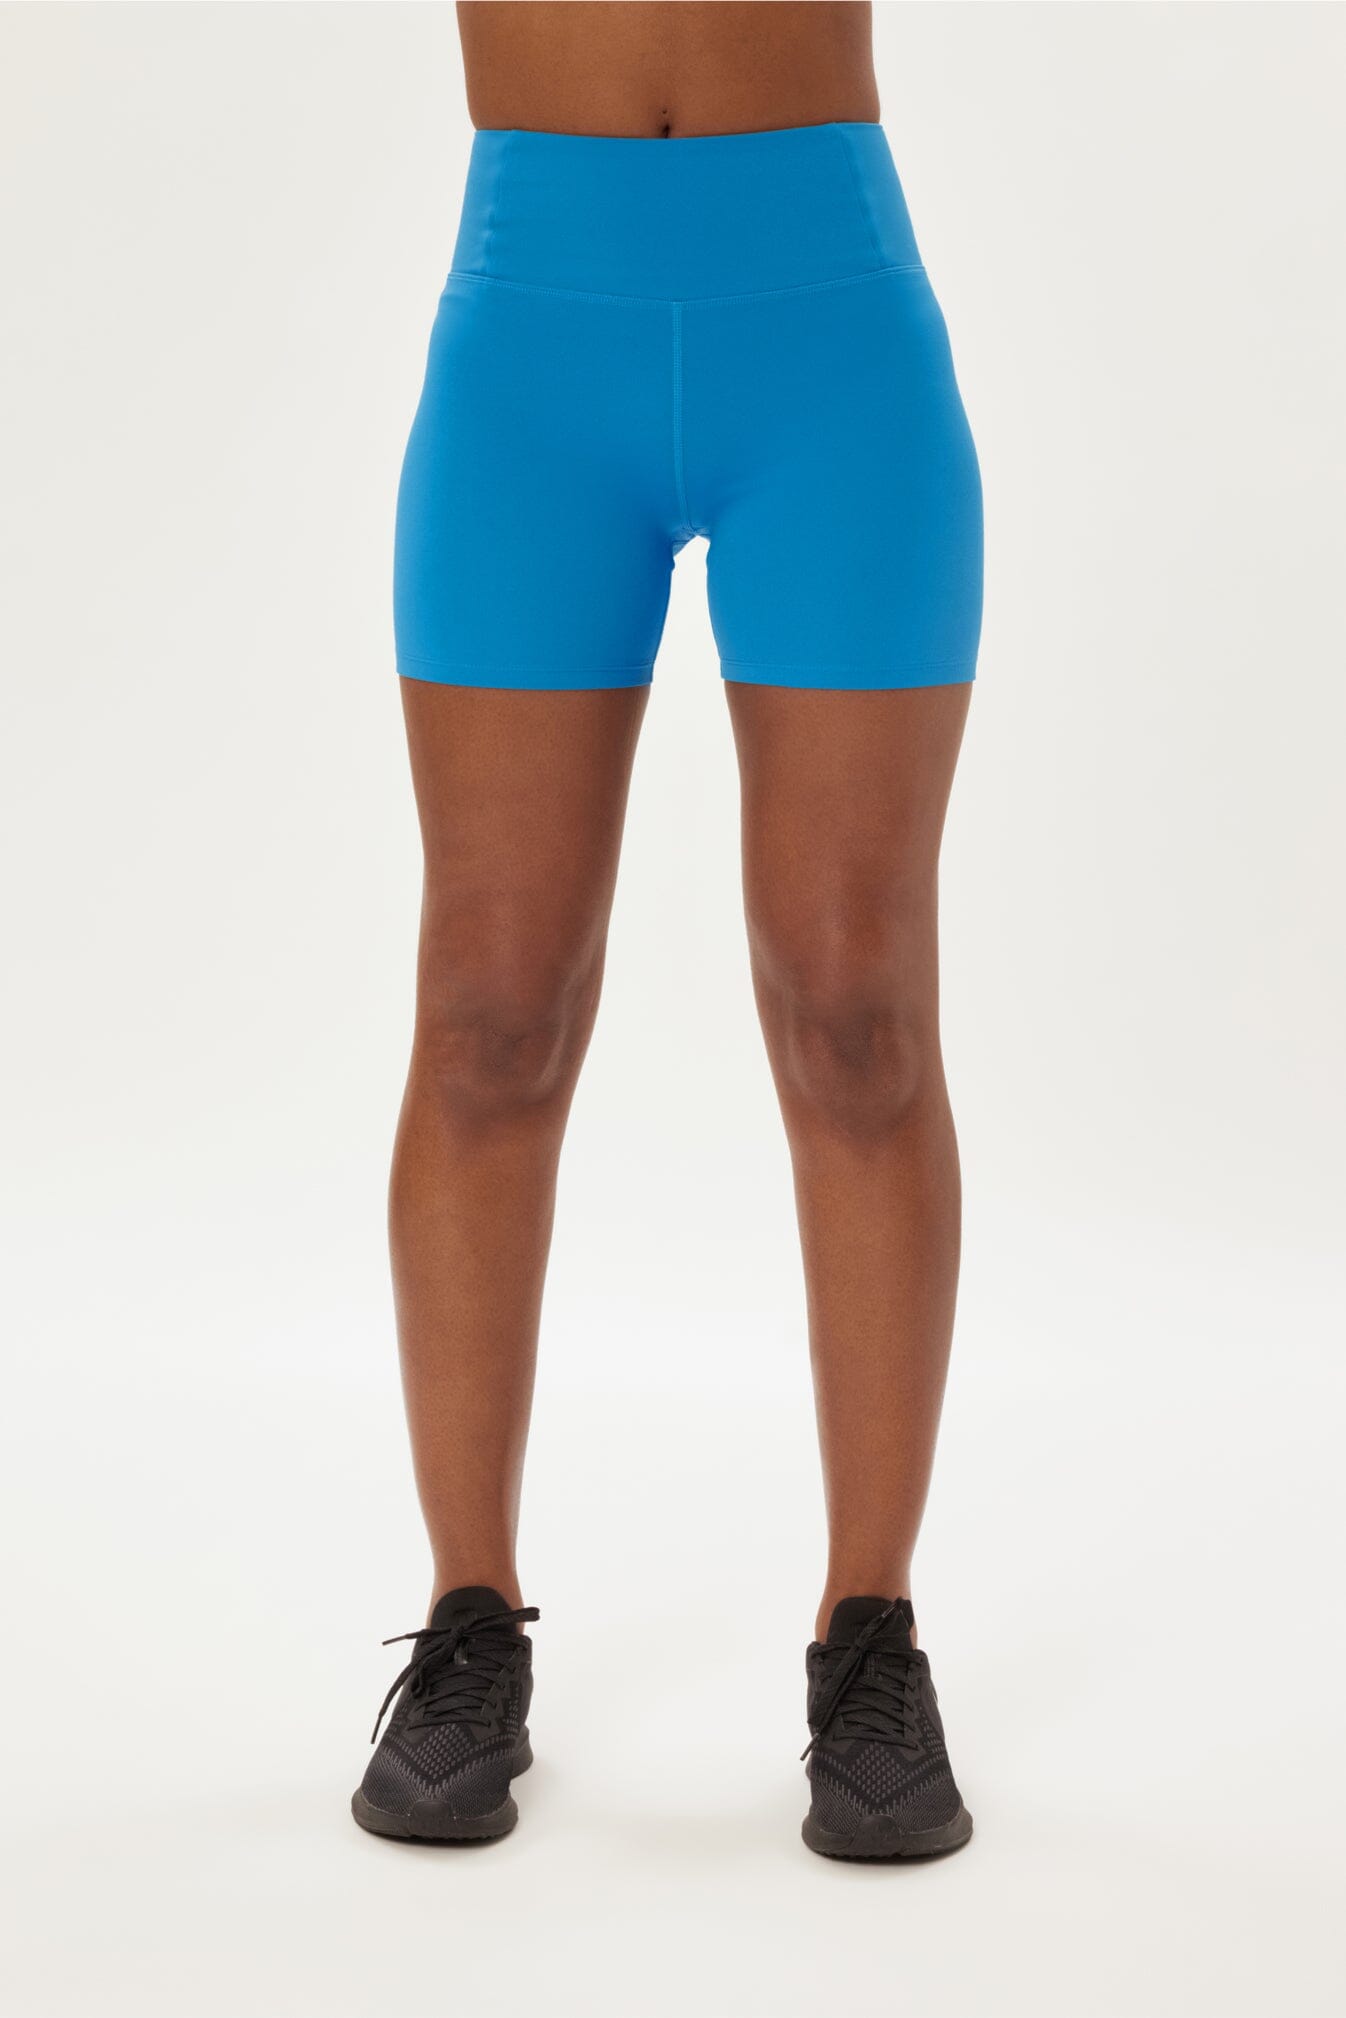 Girlfriend Collective Float Ultralight Run Shorts - Recycled RPET Ibiza Pants